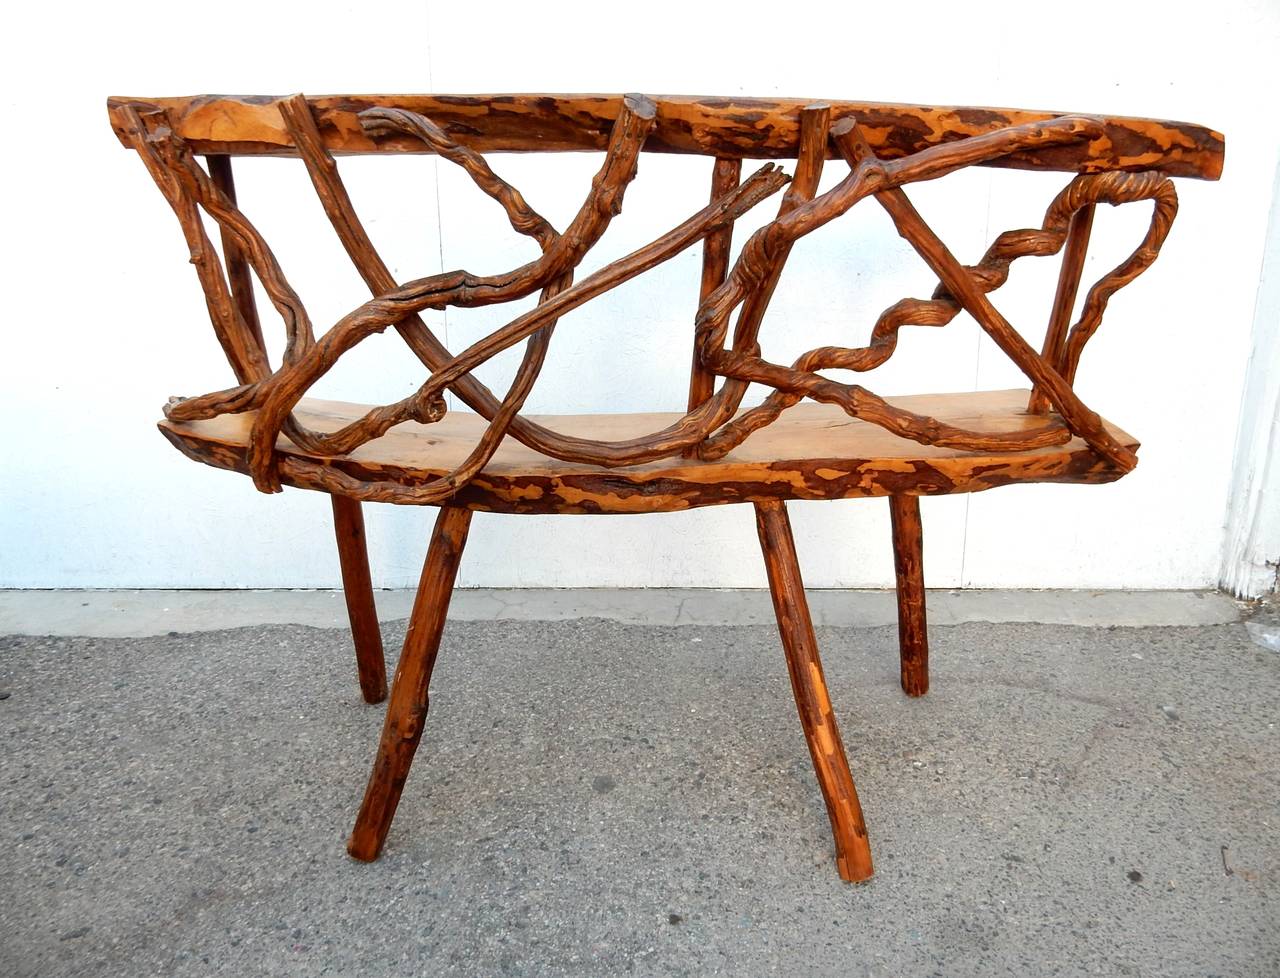 An incredible piece of organic art furniture sculpted of thick curved slaps of Mahogany and masterfully decorated across the front with ancient twisted grapevines. French origin, circa 1940.
A set of 3 matching stools completes the rare and amazing